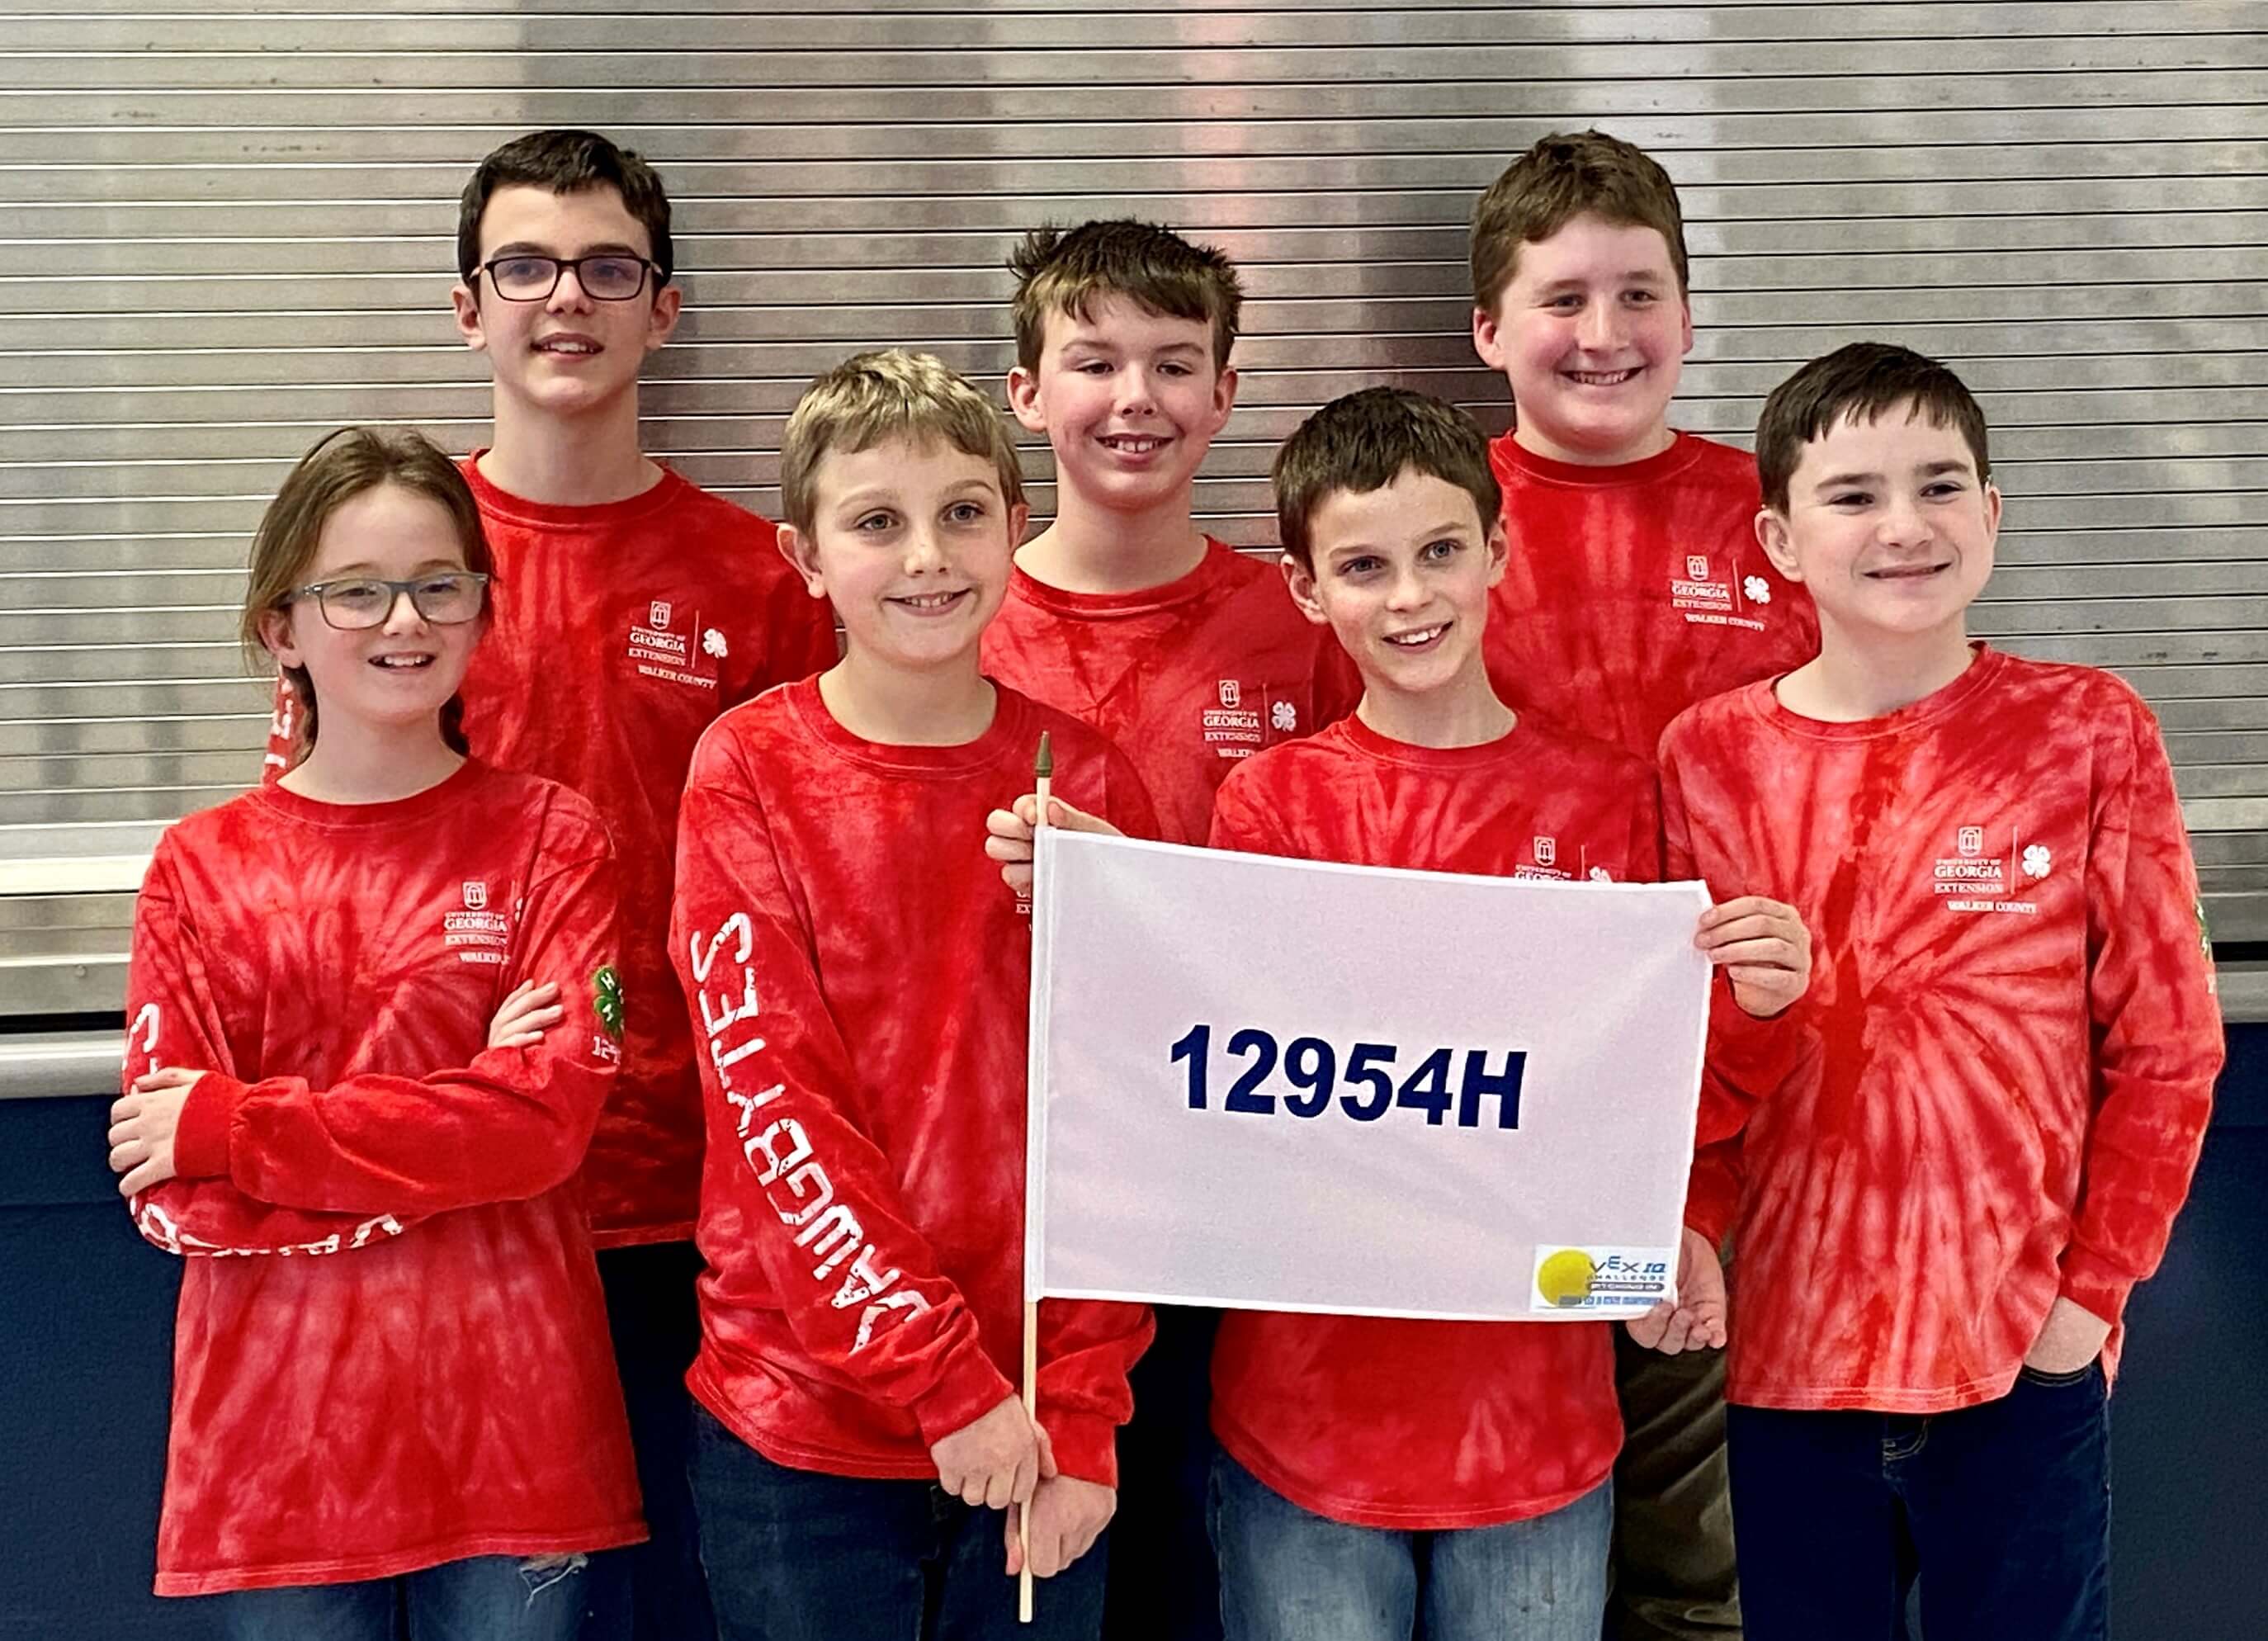 The Walker County 4-H Robotics Team, also known as the “DawgBytes,” earned a spot at the World Robotics Championships with their VEX IQ robot named “Cook.” Team members include (back row from left) Grant Matteson, Sam Brown, Liam Logan, (front row from left) Chyanne Martin, Mike Hardinger, Brendan Matteson, and Gregory Hobbs.